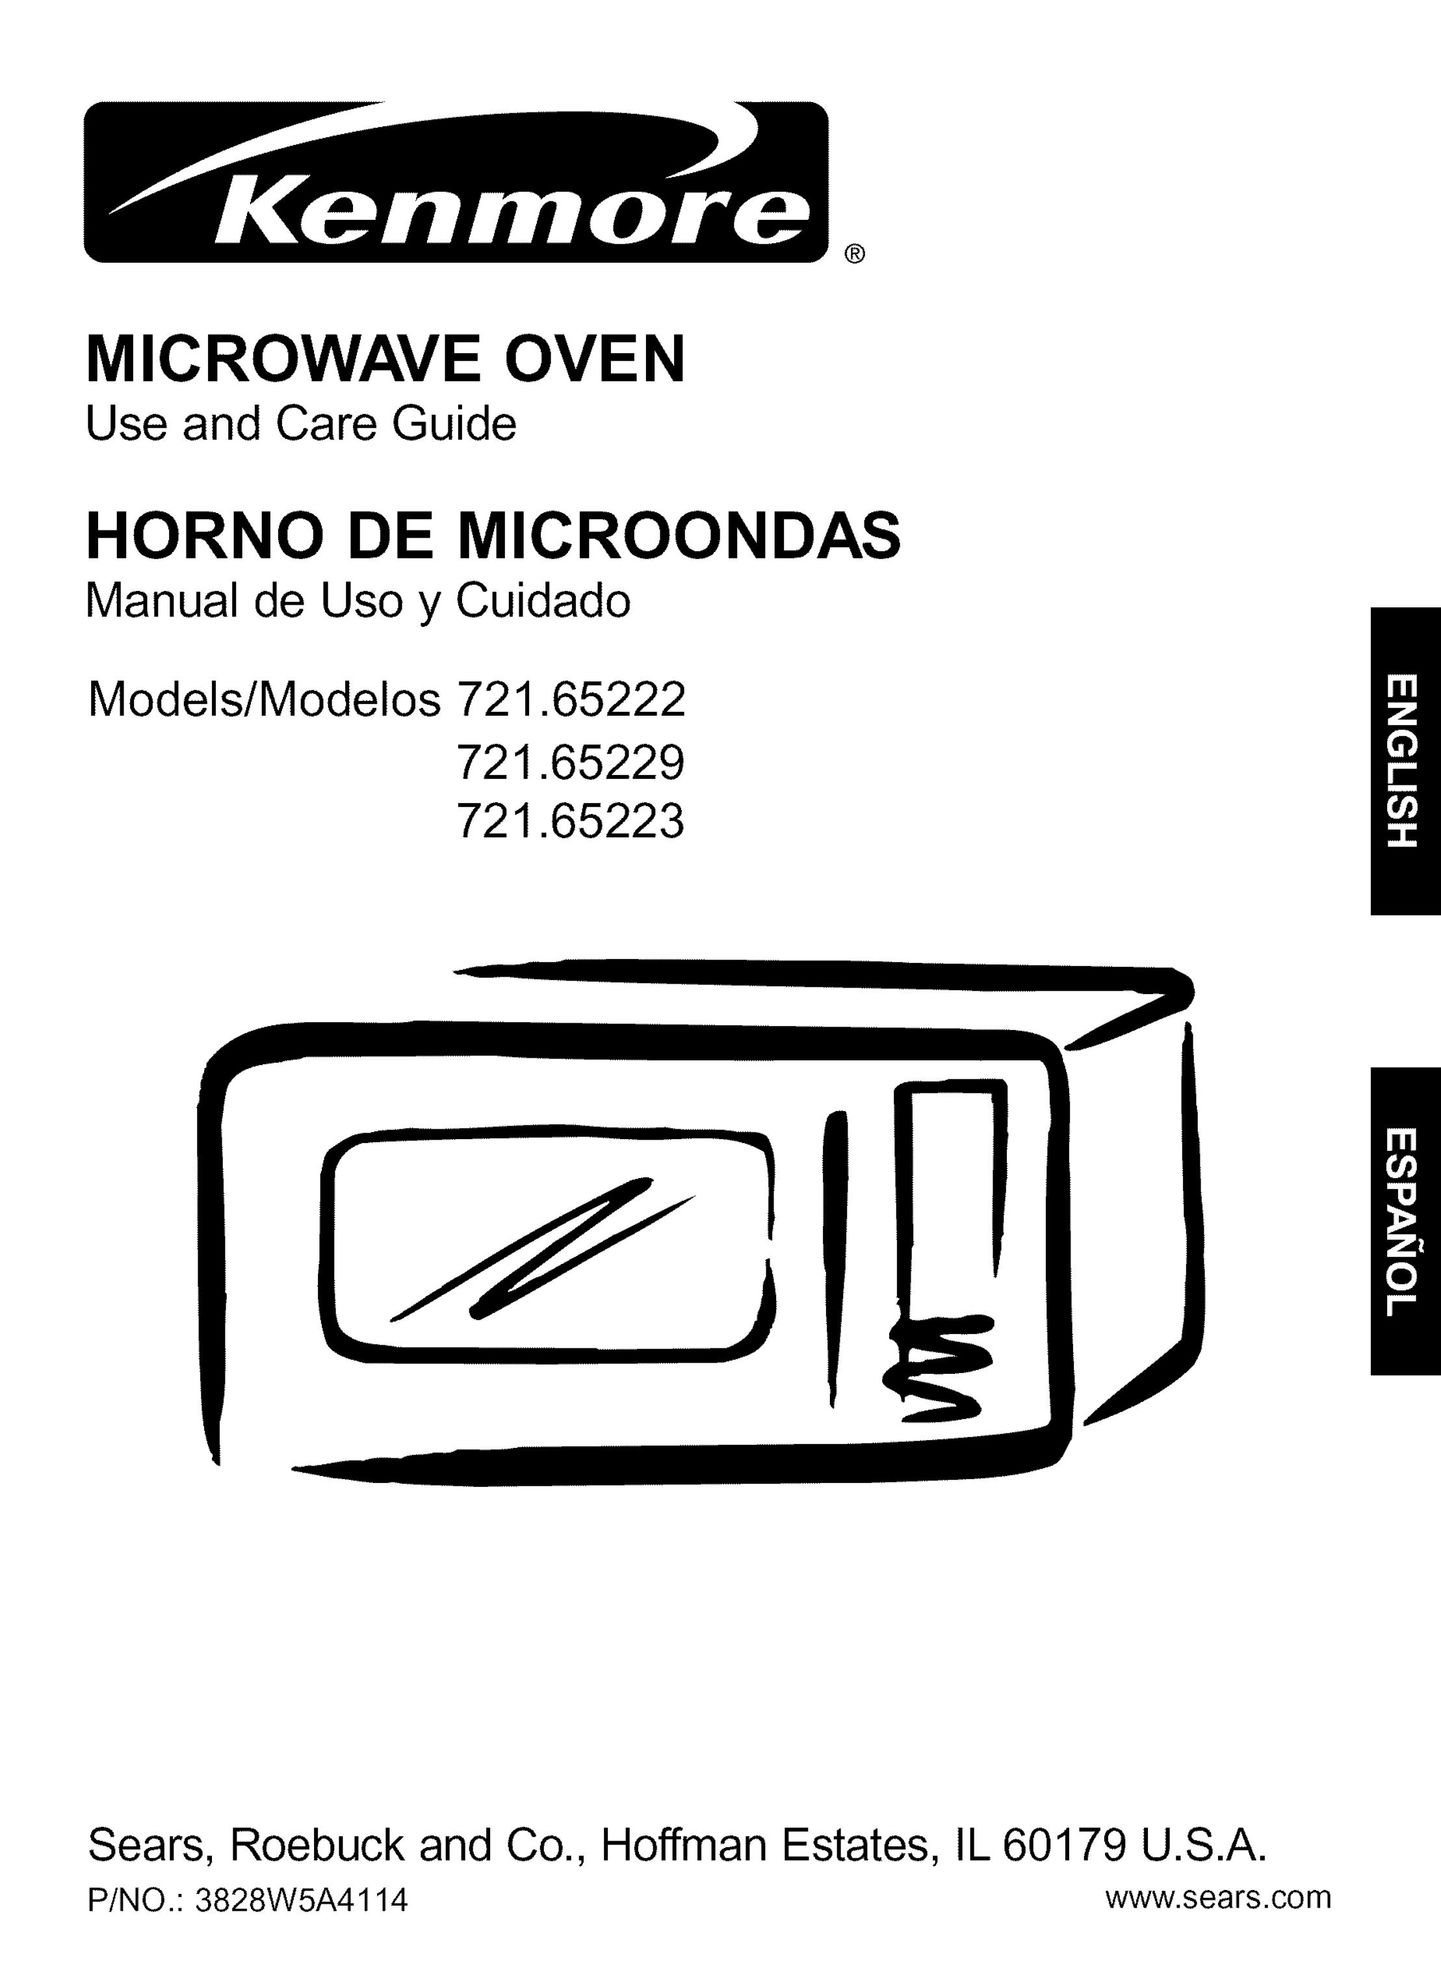 Kenmore 721.65223 Microwave Oven User Manual